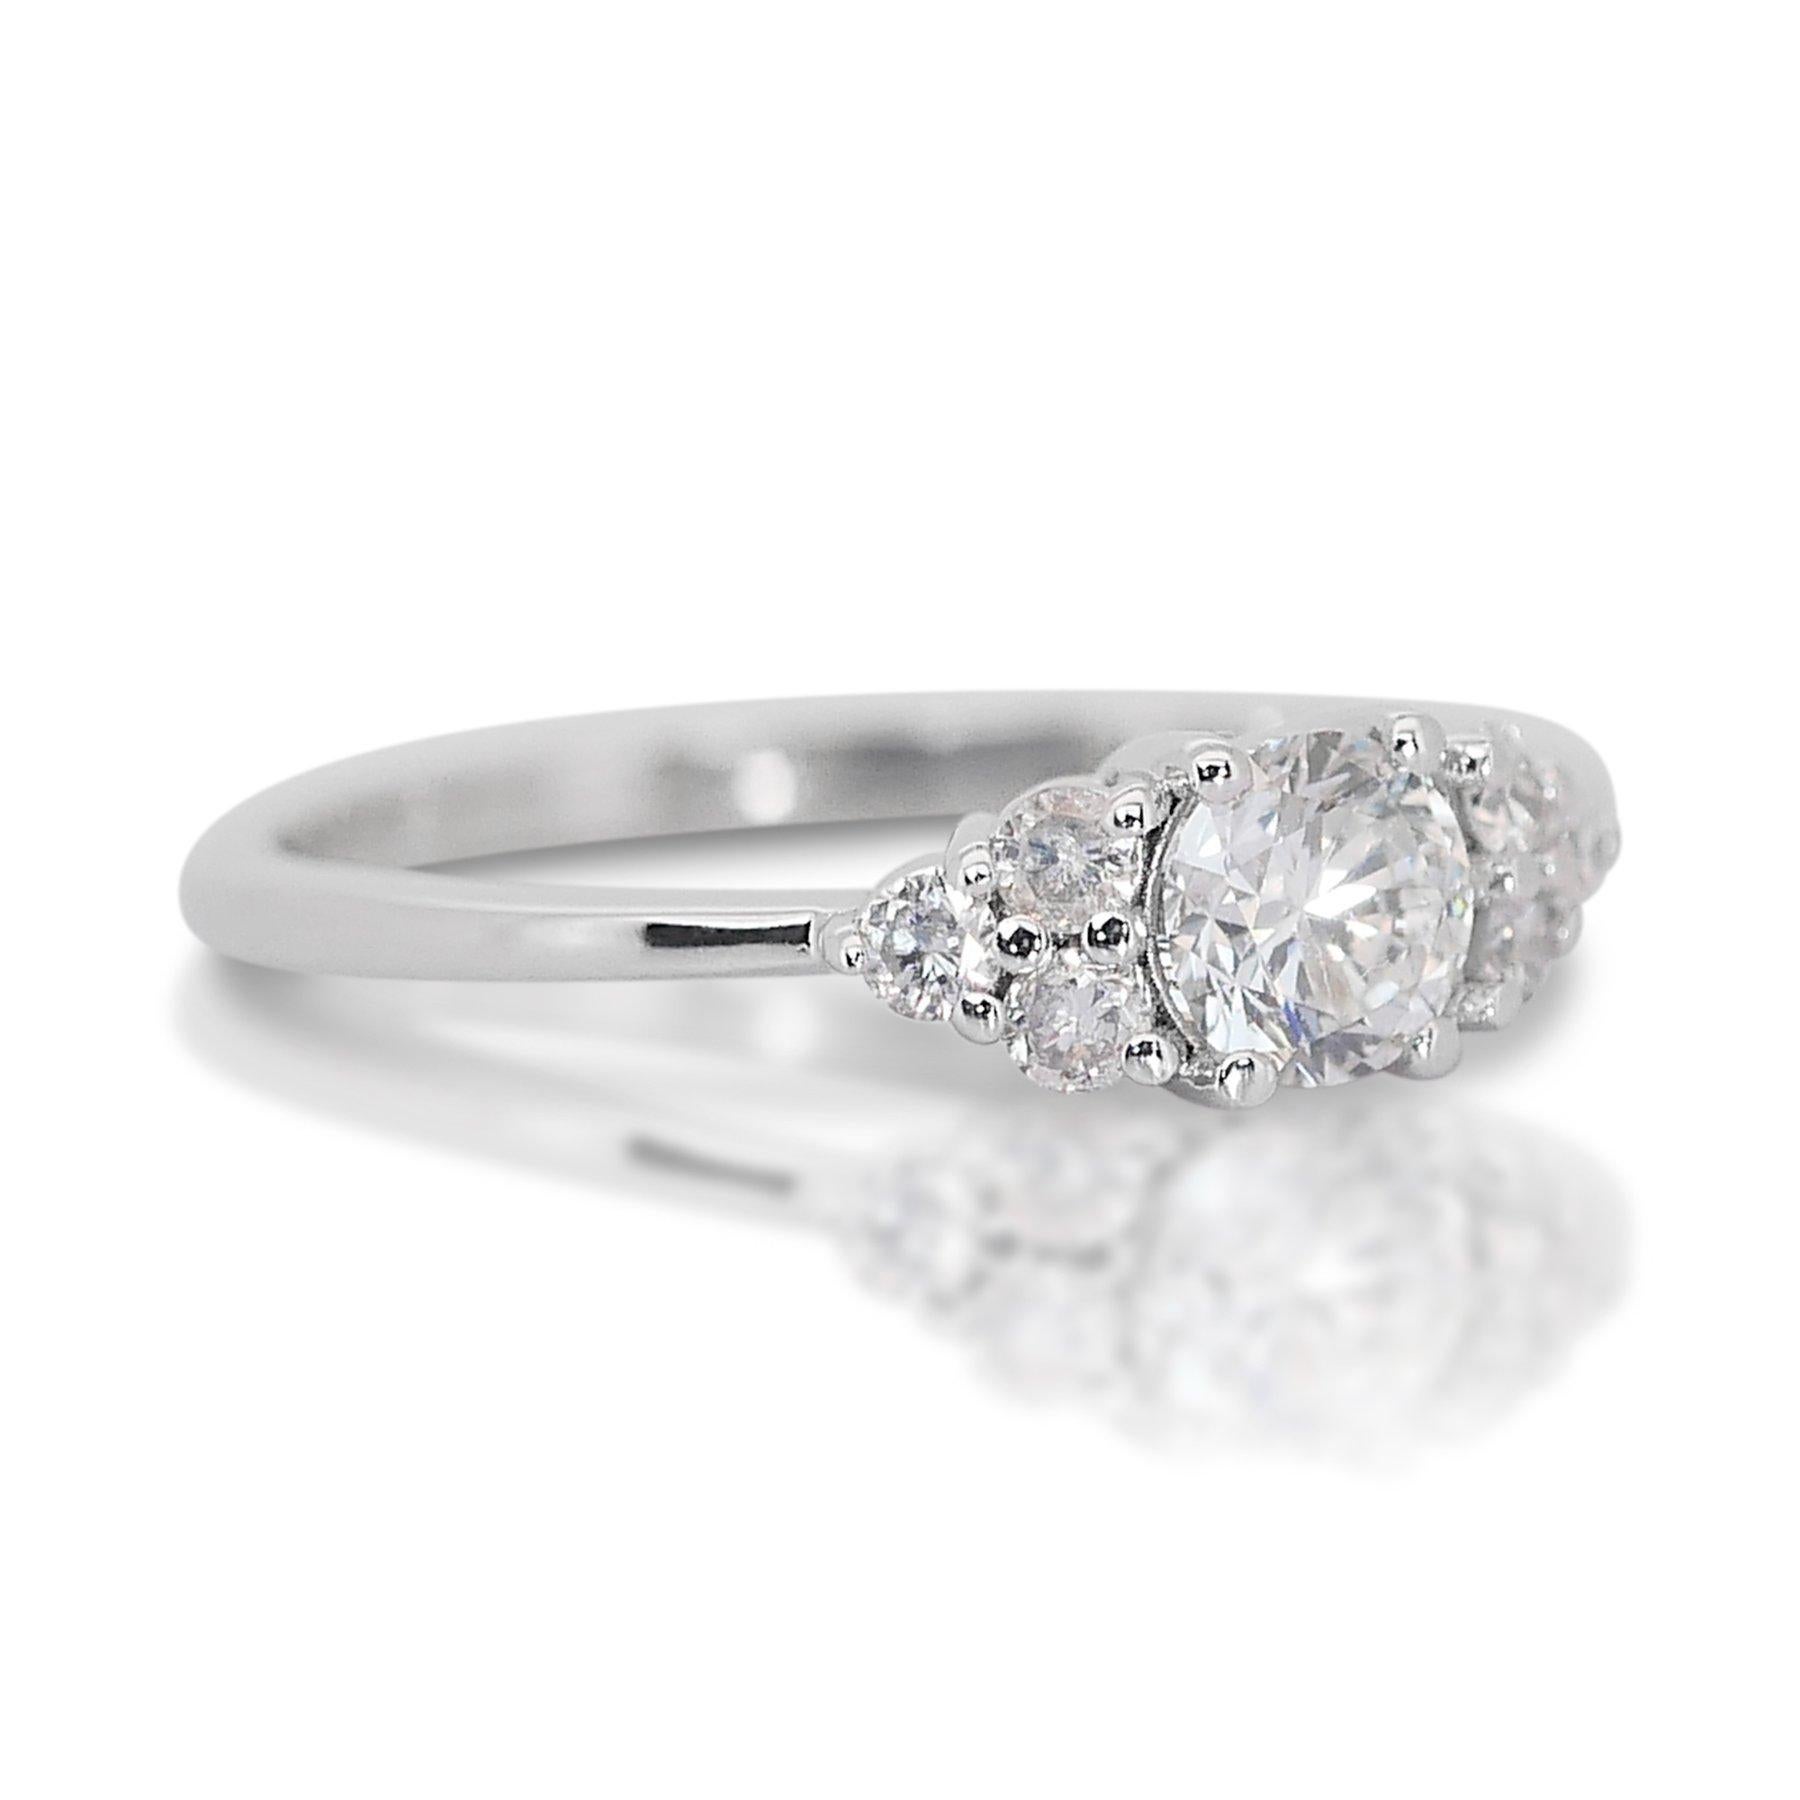 Sparkling 0.96ct Diamond Pave Ring in 18k White Gold - GIA Certified

This captivating ring showcases a classic and elegant design, crafted in lustrous 18k white gold. The centerpiece is a stunning 0.71-carat round-cut diamond, boasting exceptional